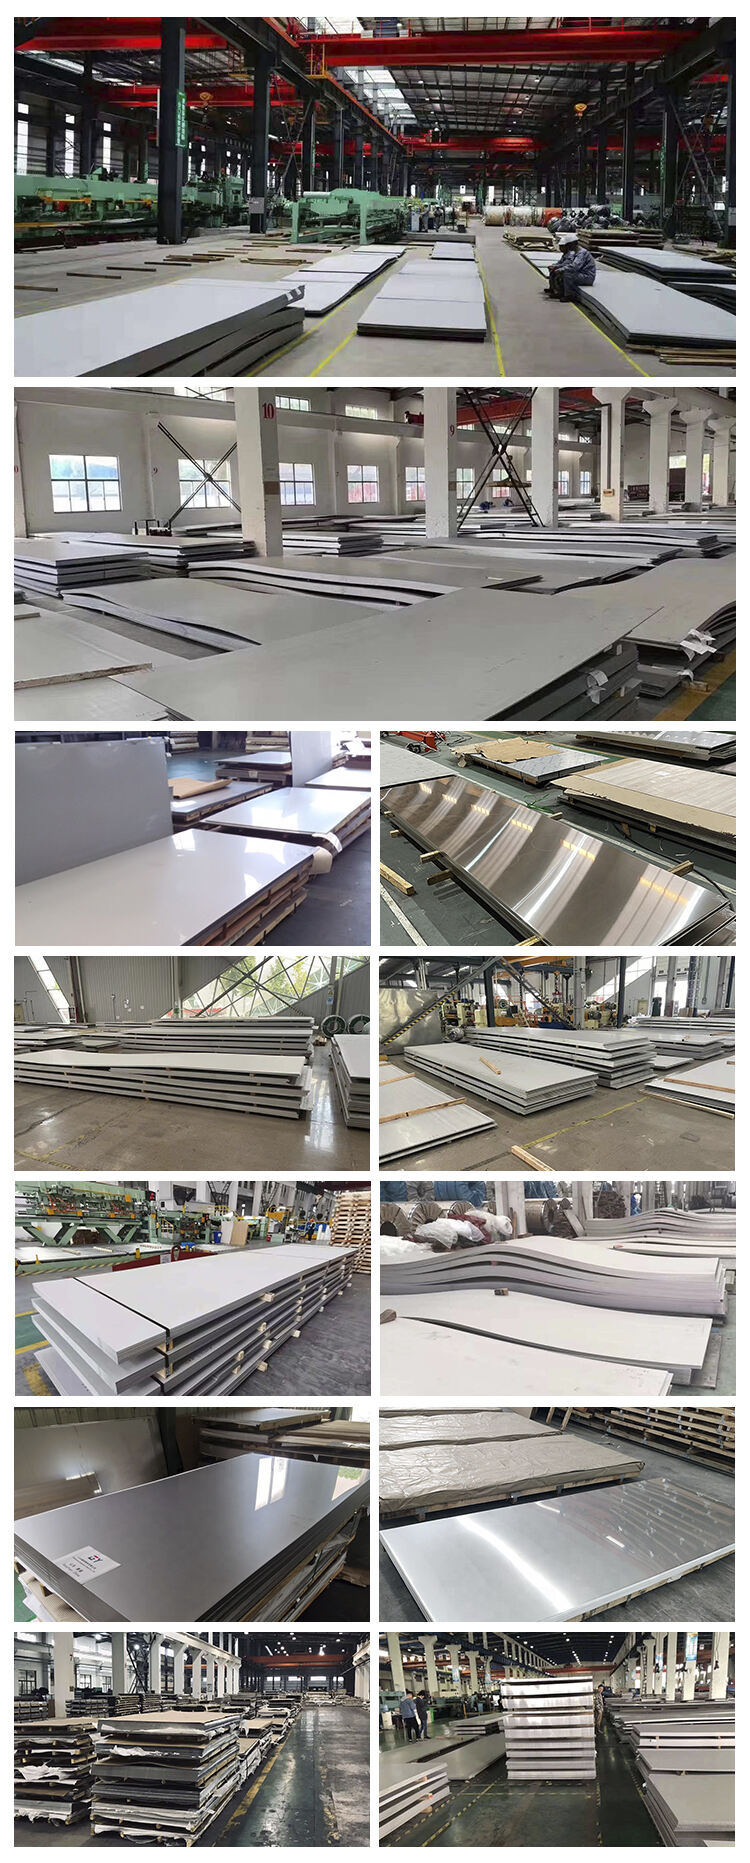 1mm 2mm 3mm 4mm 5mm stainless steel sheet 304 ss plate factory